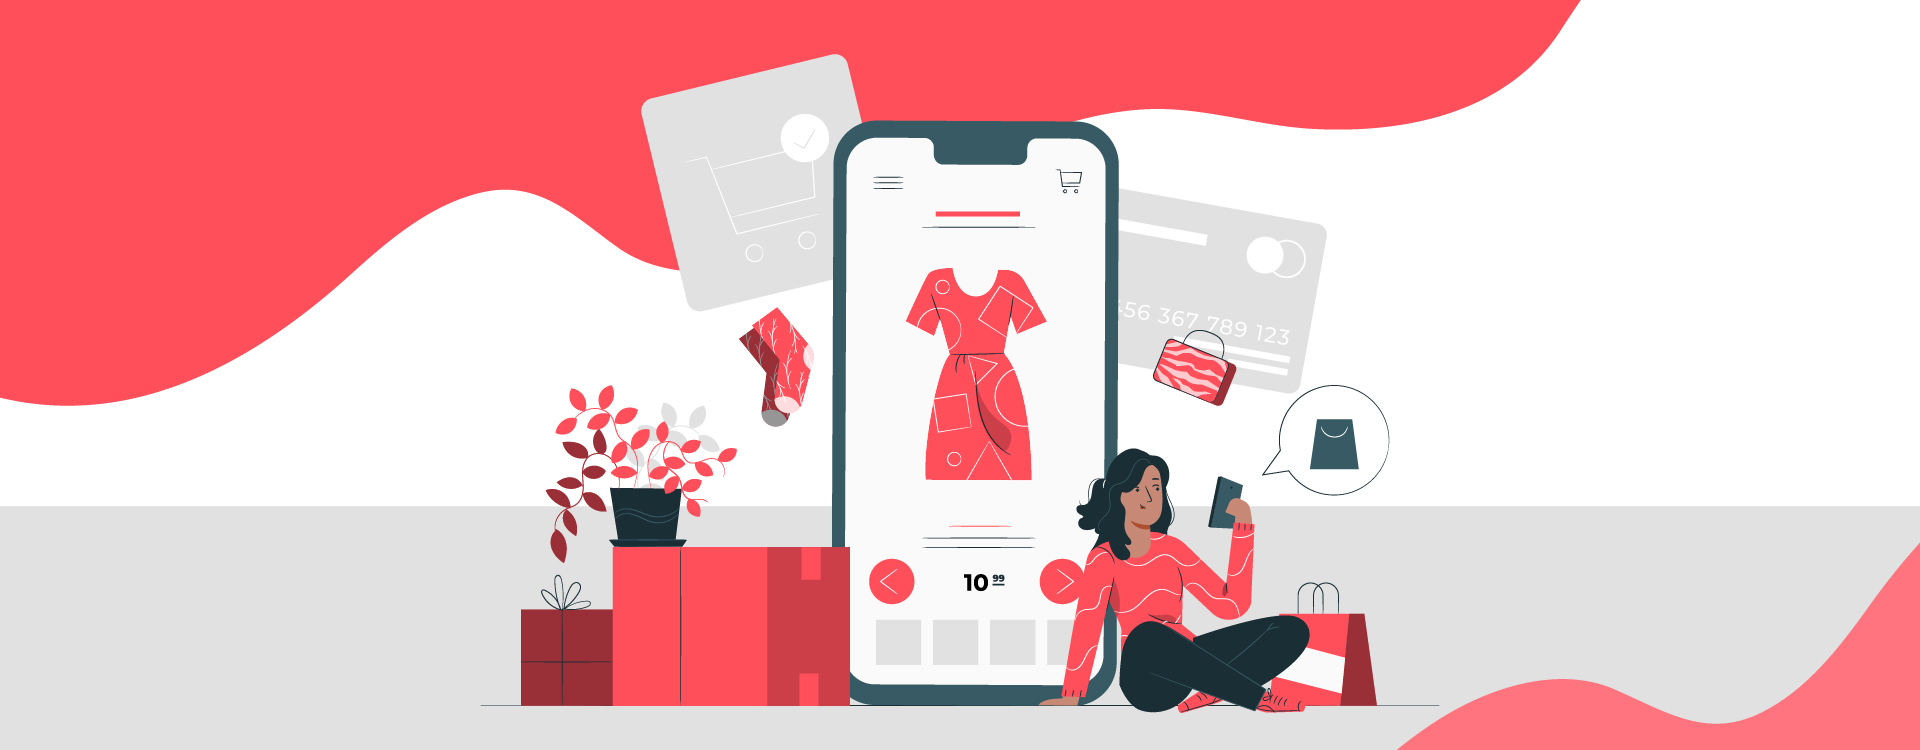 Trends in fashion e-commerce to rule in 2021